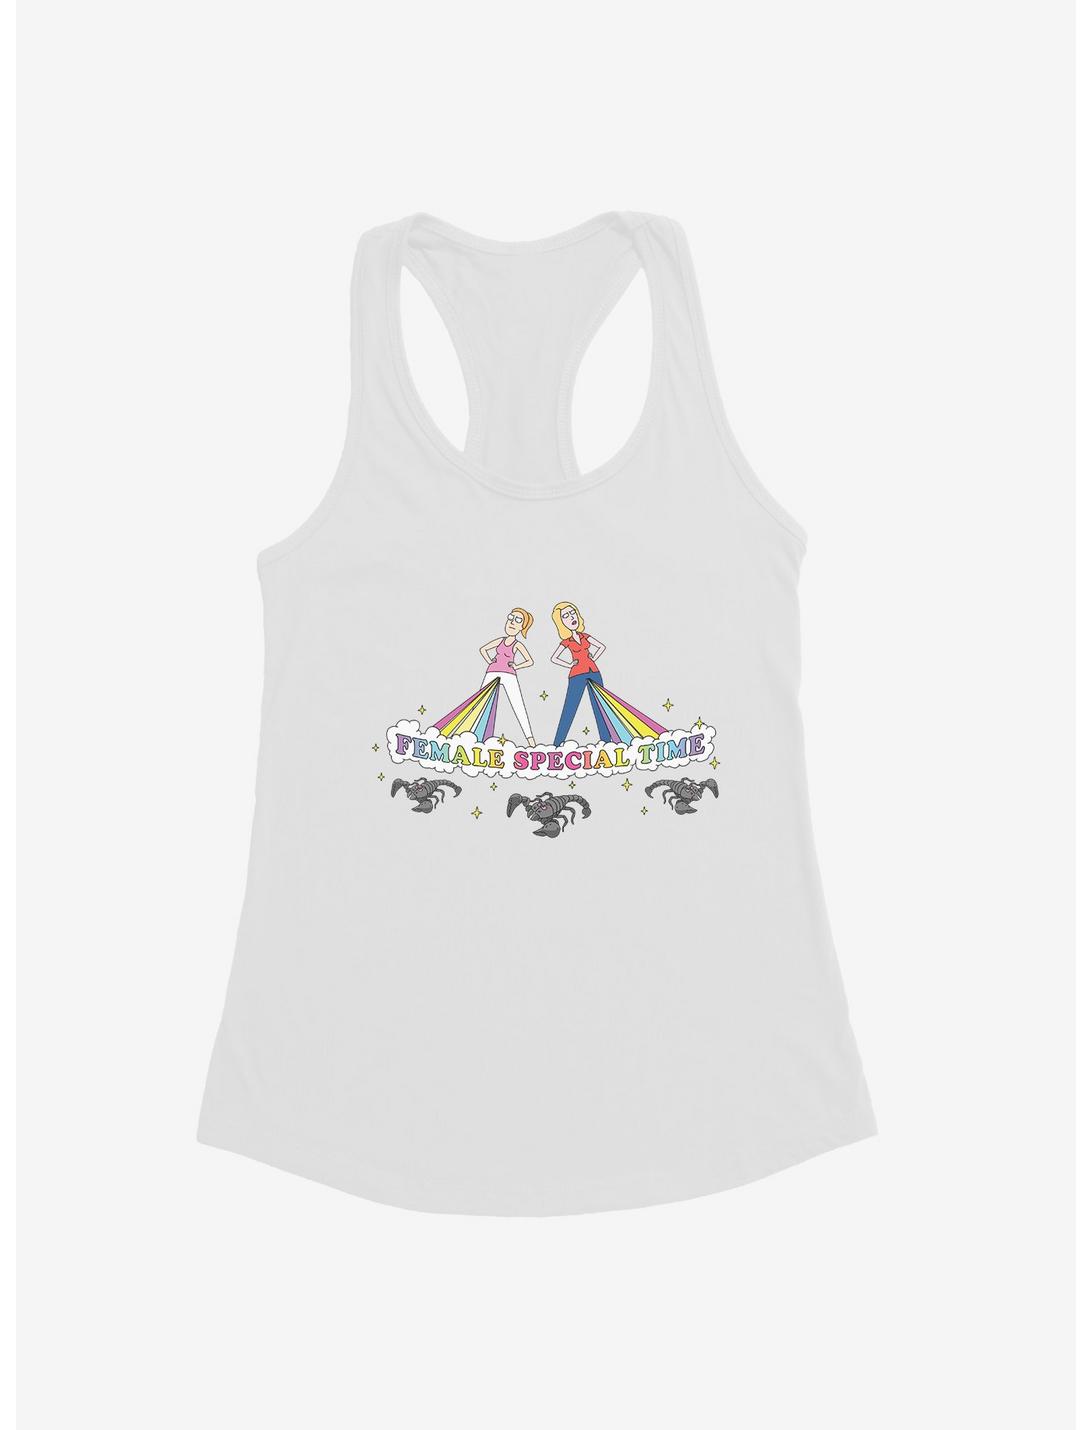 Rick And Morty Female Special Time Girls Tank, WHITE, hi-res